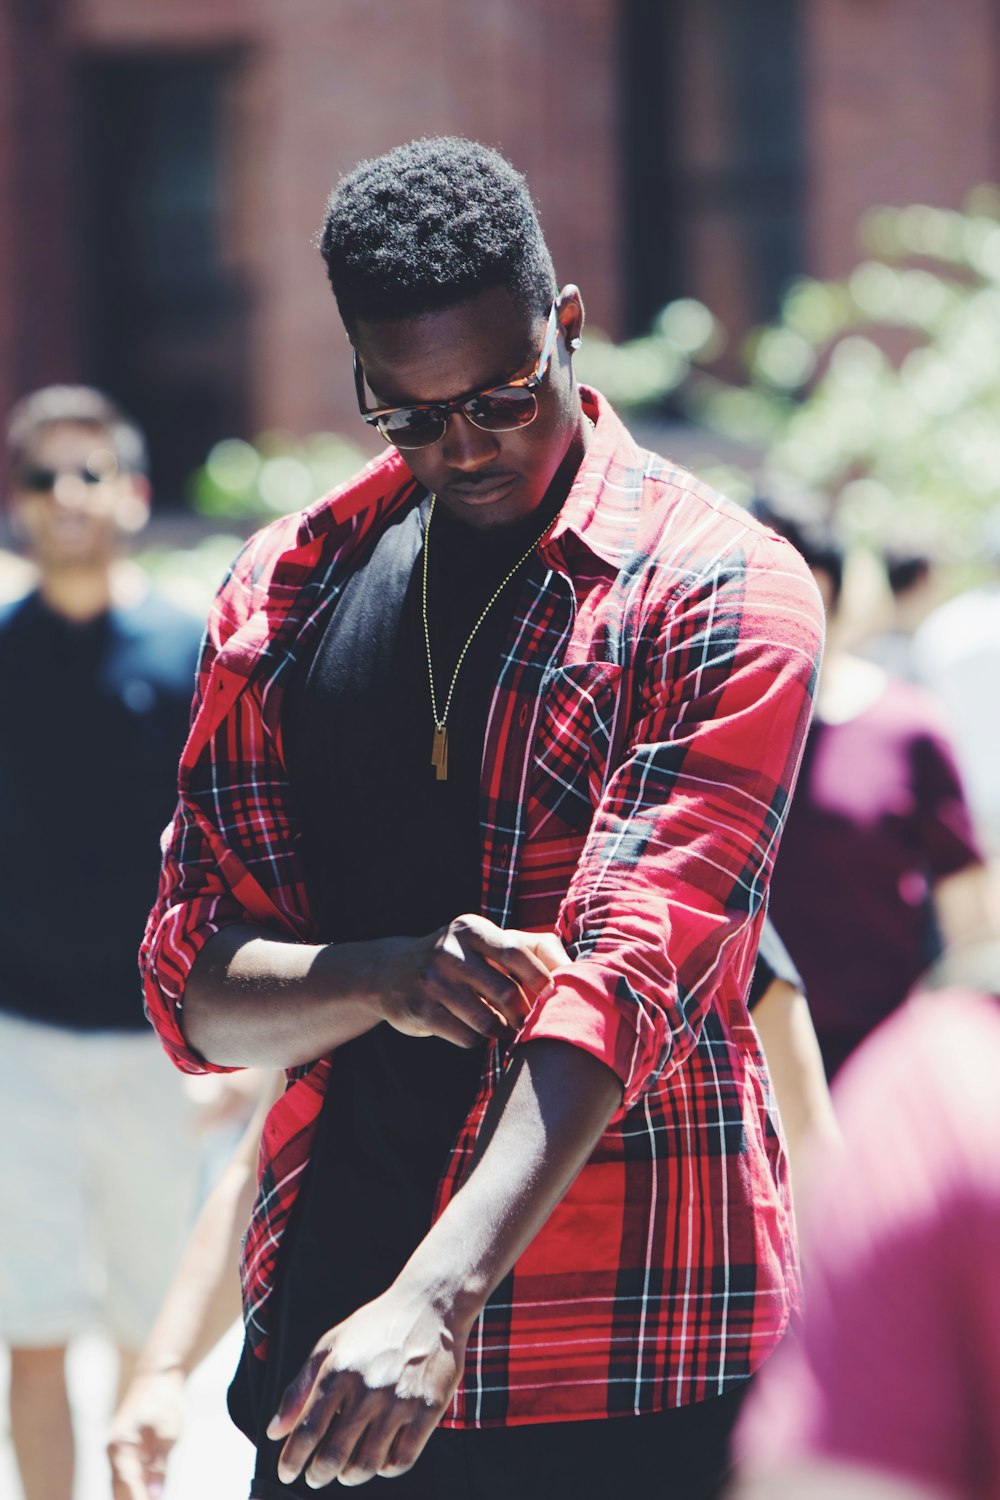 man fixing his red, black, and white plaid sport shirt sleeve during daytime